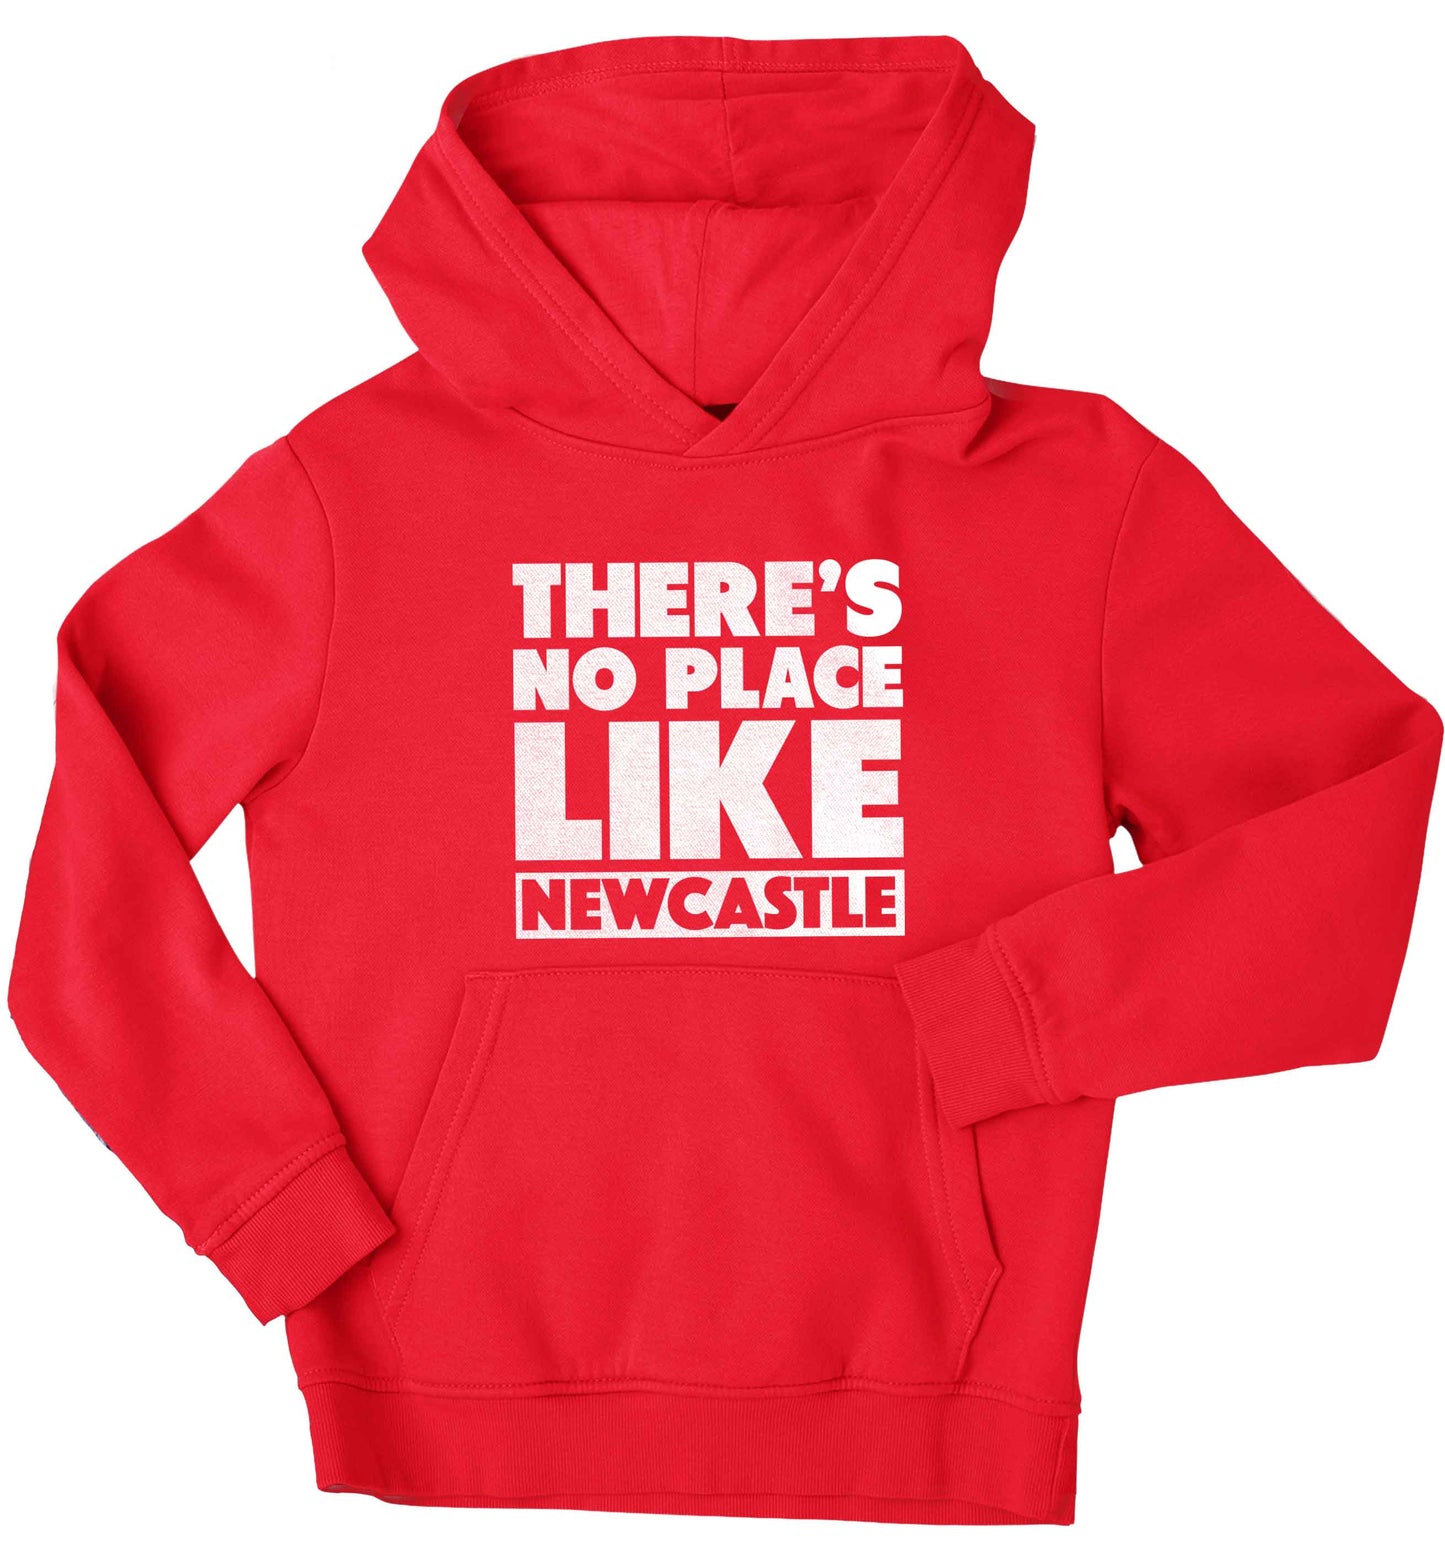 There's no place like Newcastle children's red hoodie 12-13 Years